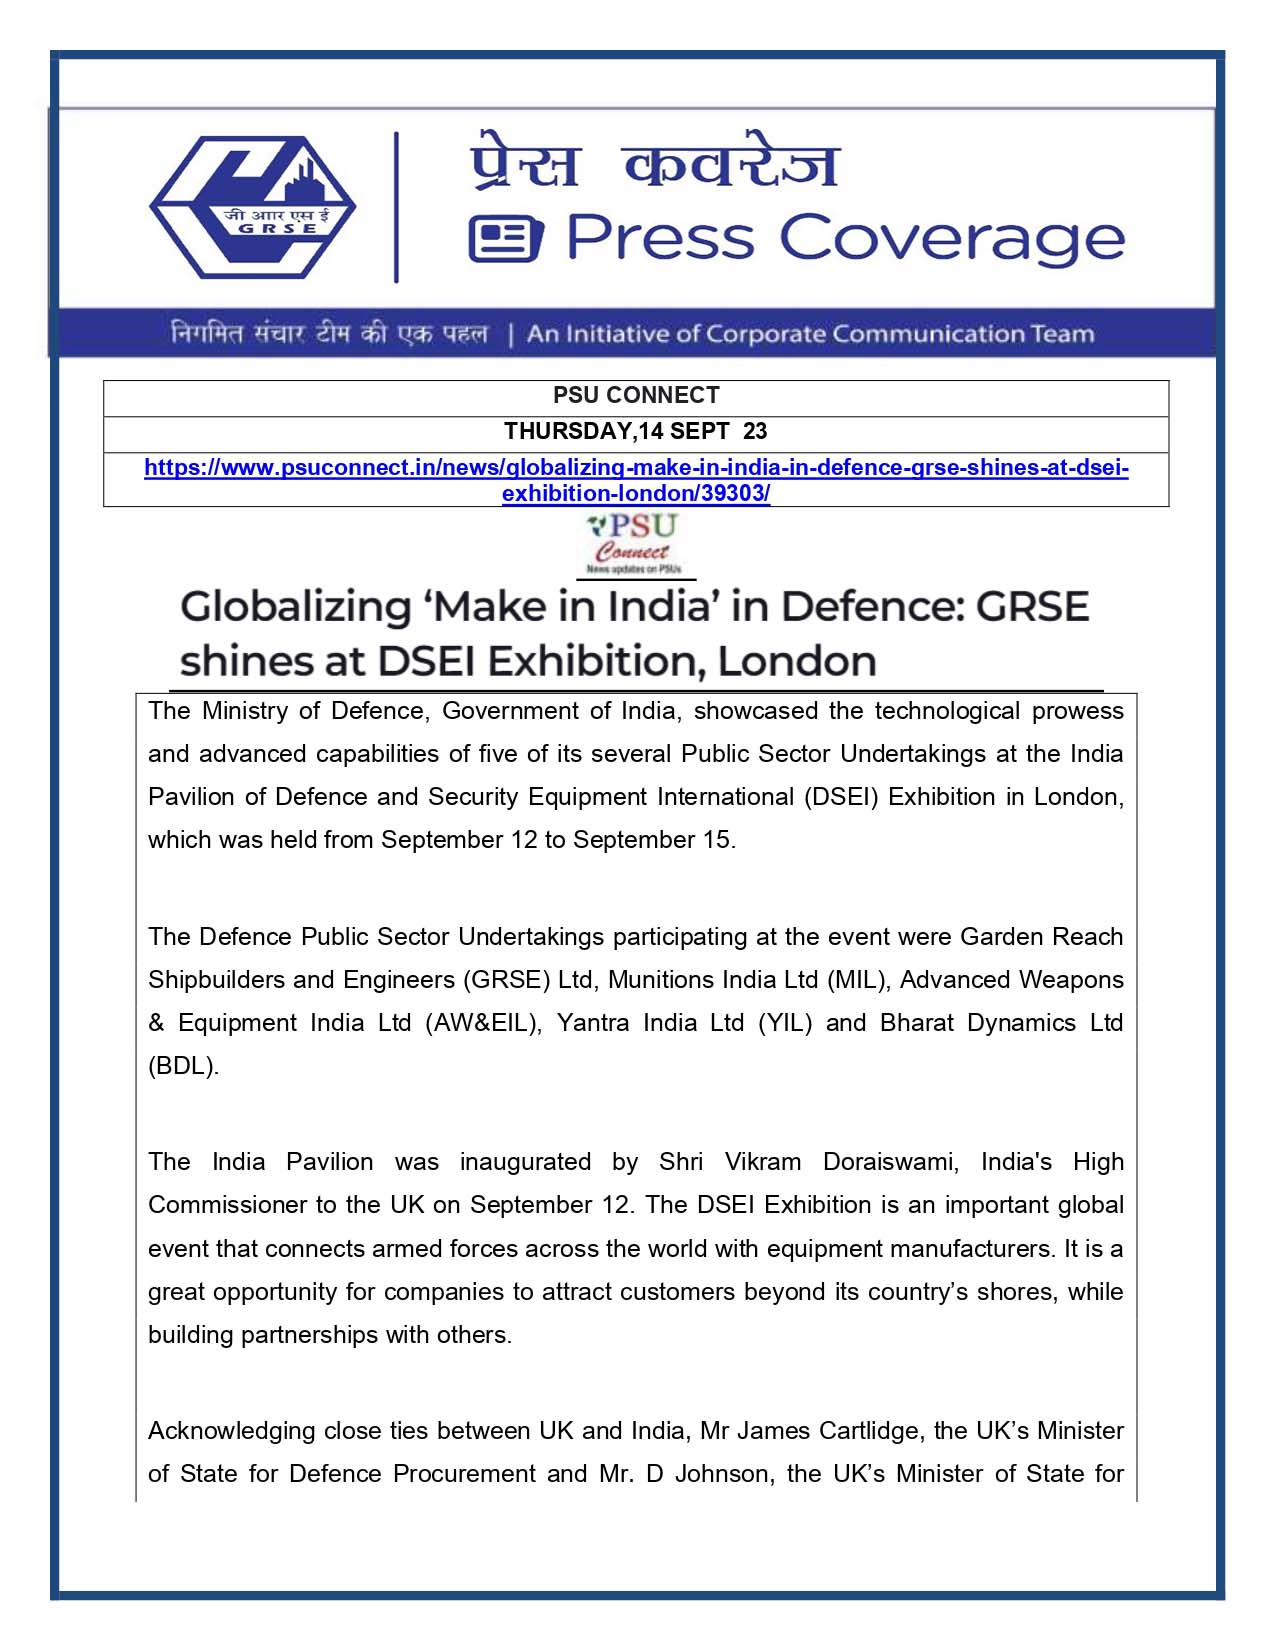 Press Coverage : PSU Connect, 14 Sep 23 : Globalizing 'Make In India' in Defence : GRSE shines at DSEI Exhibition, London